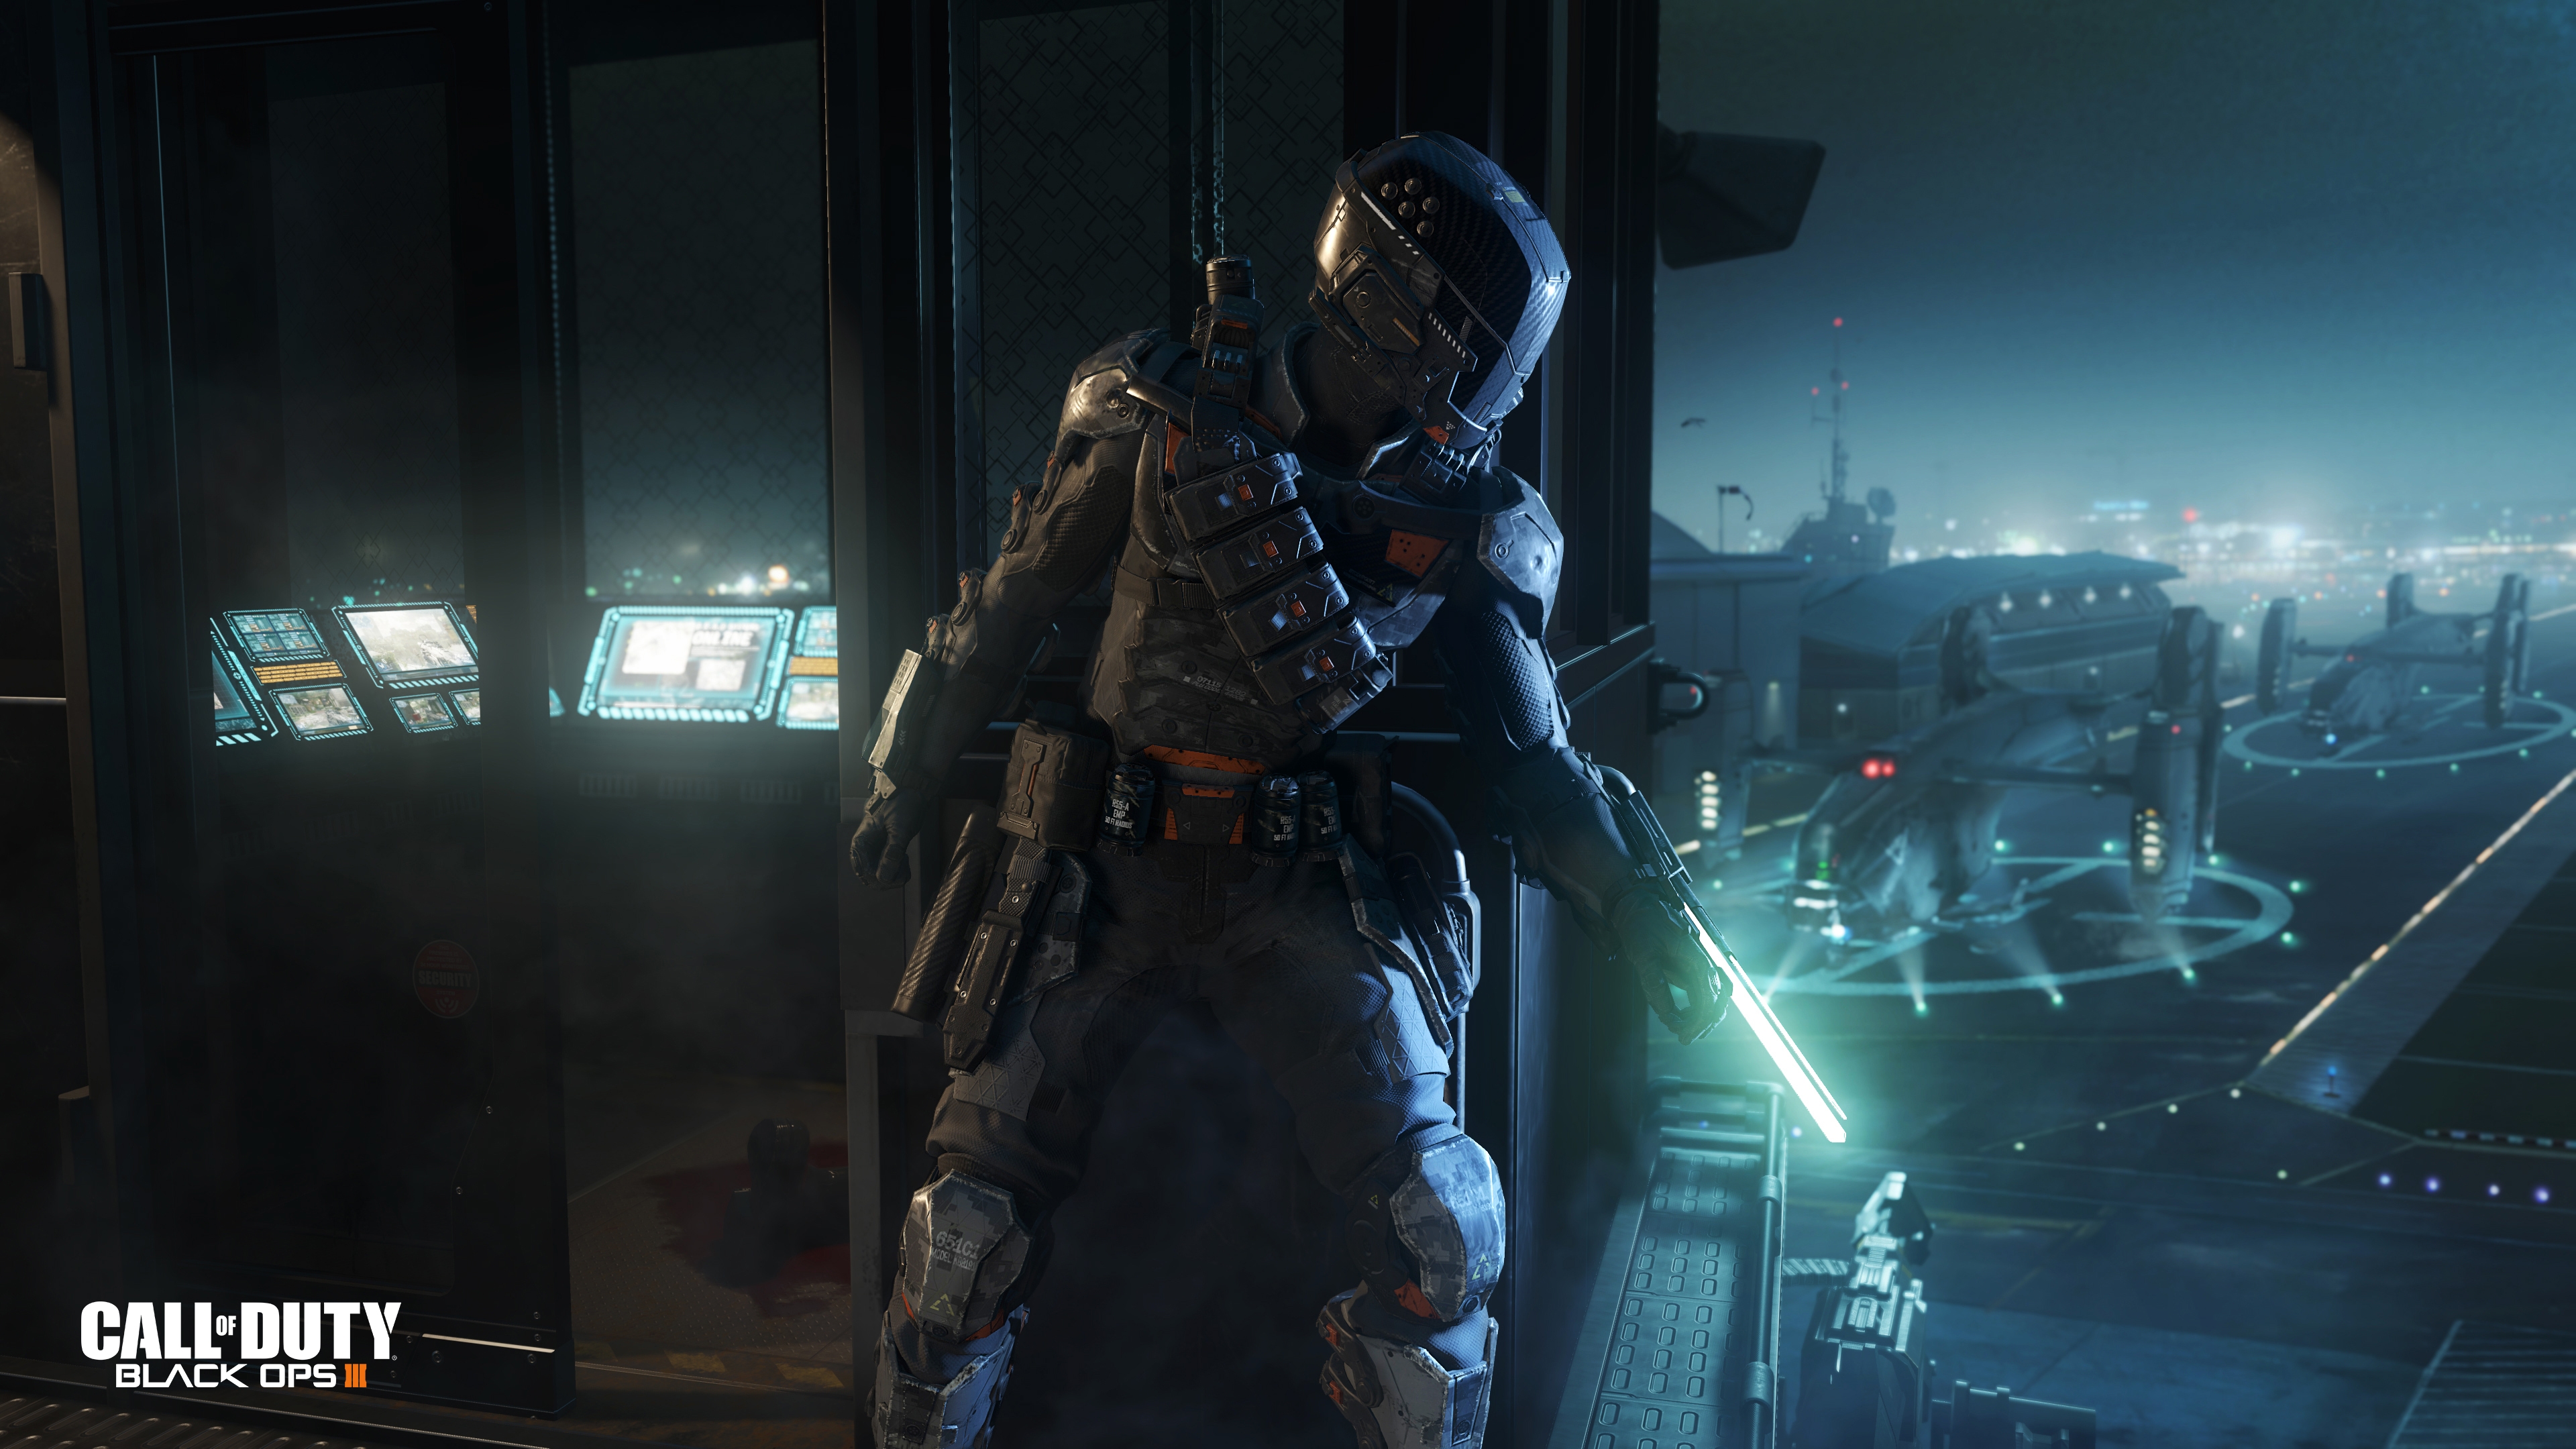 Call of Duty Black Ops 3 Specialist Spectre for 3840 x 2160 Ultra HD resolution